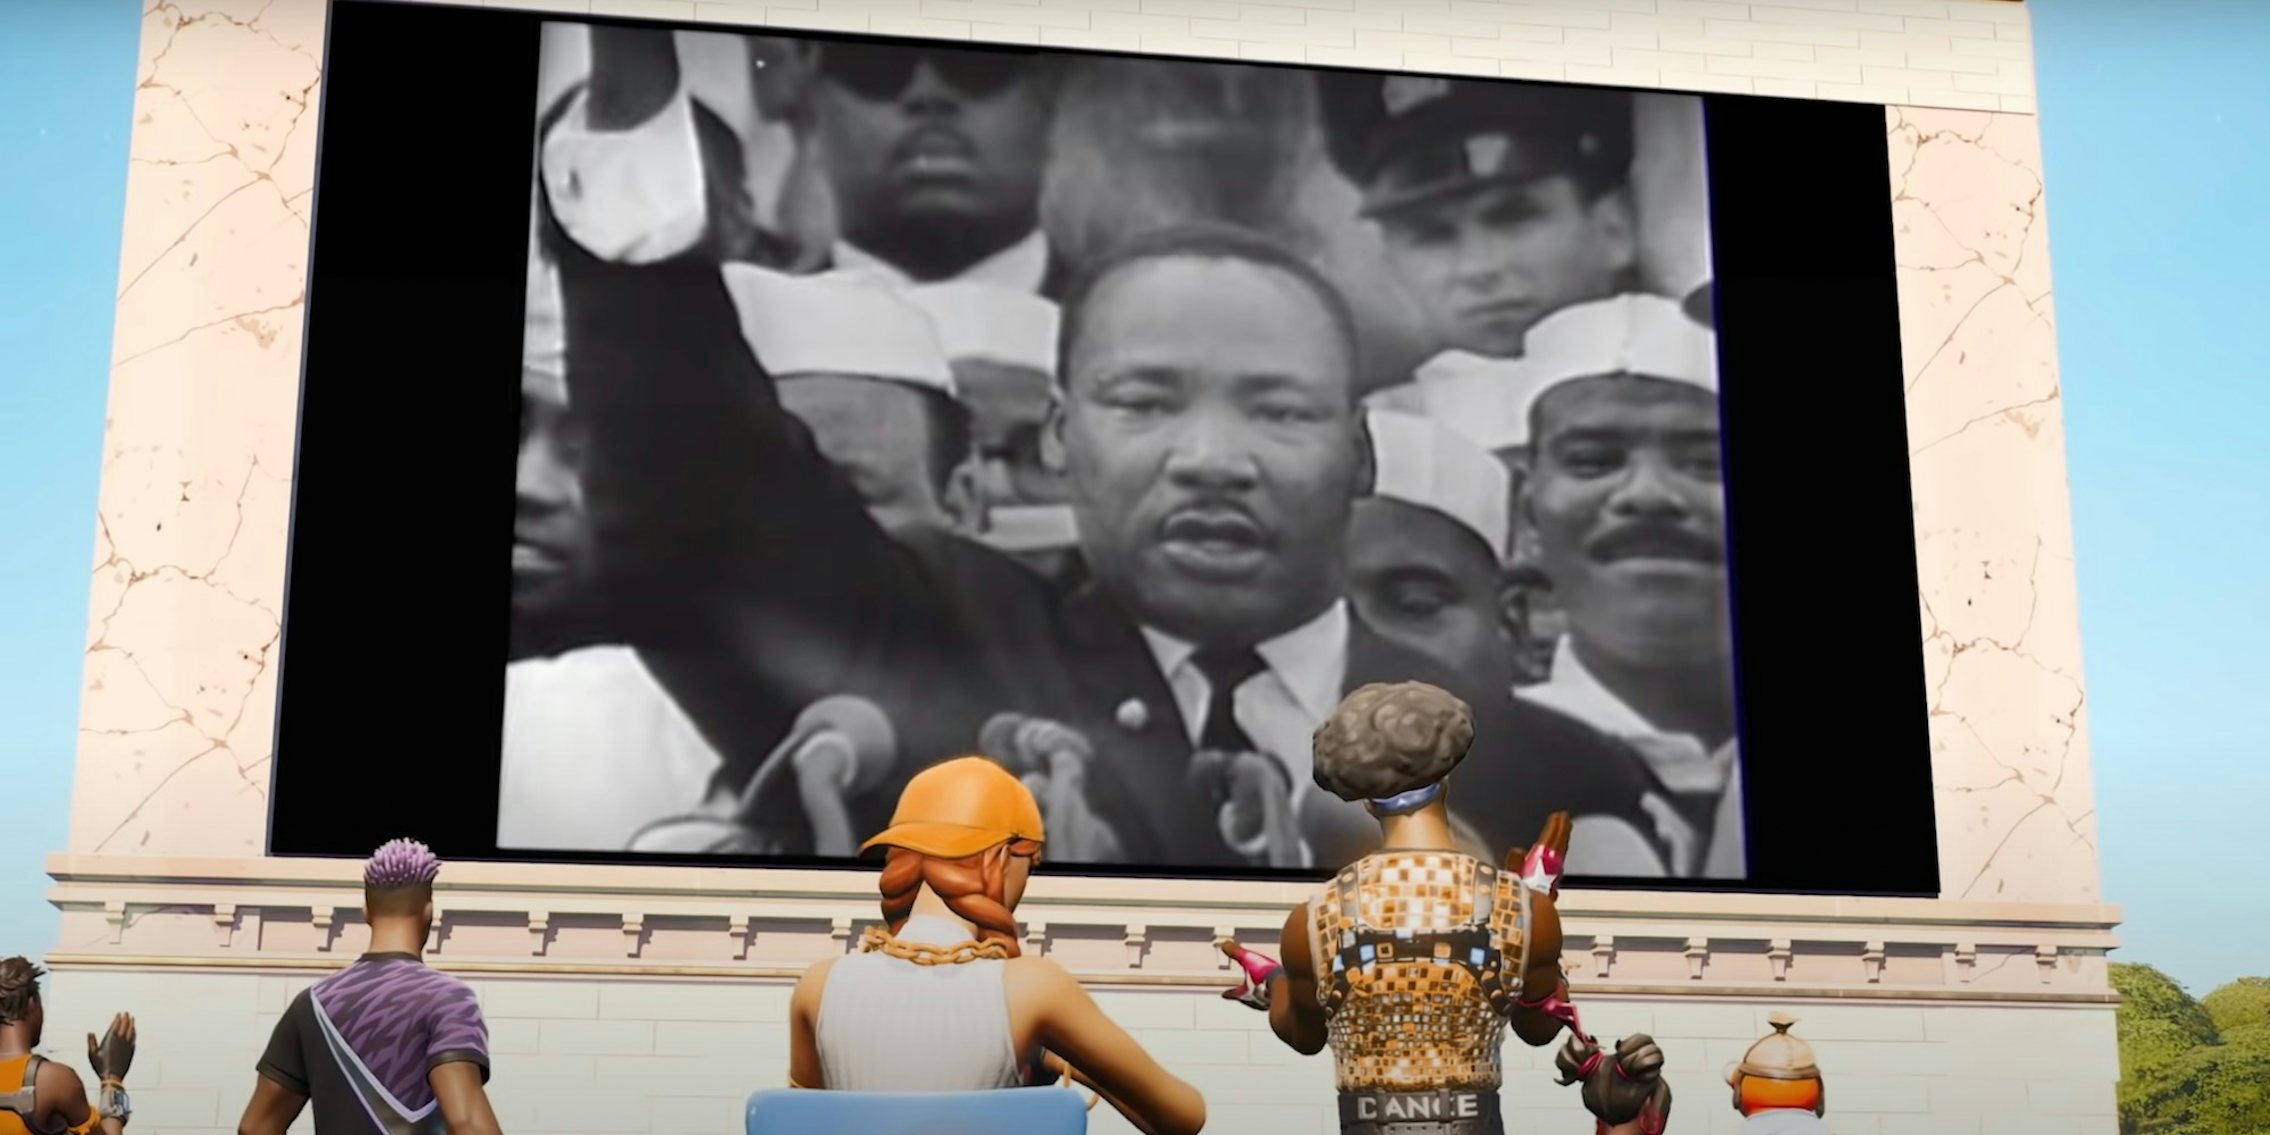 martin luther king jr reciting i have a dream speech on screen in fortnite